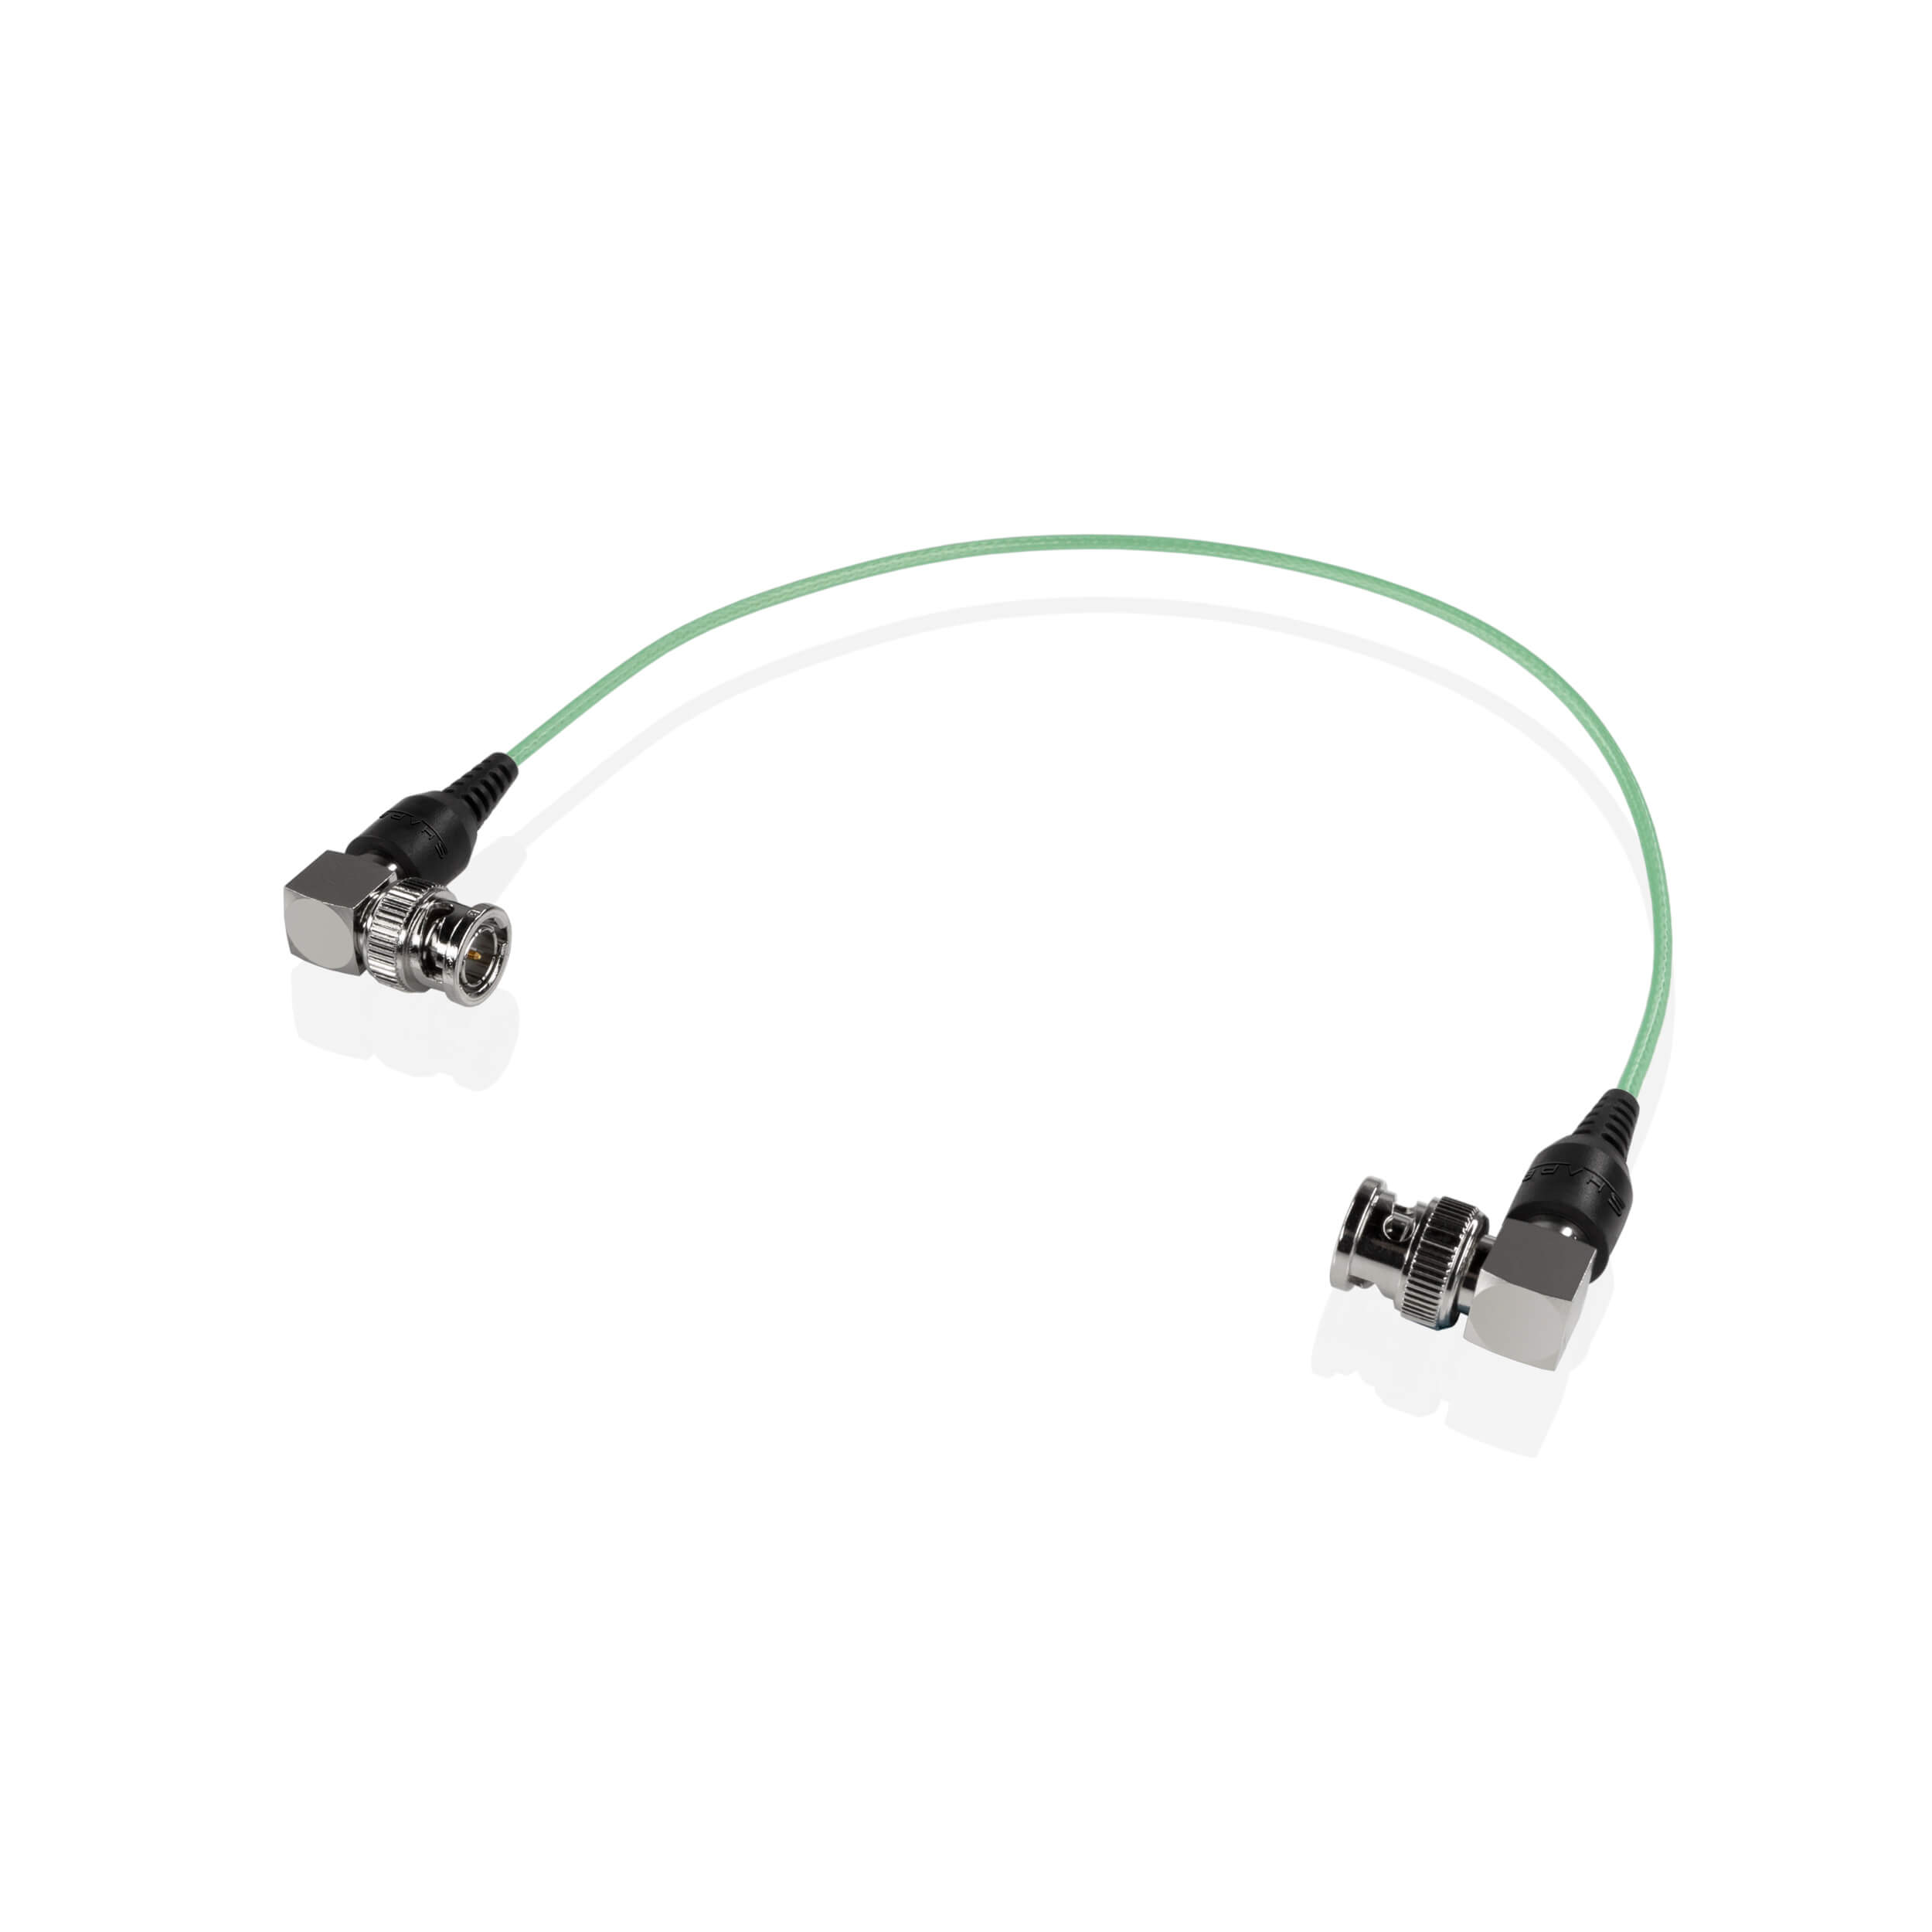 SHAPE Skinny 90° BNC Cable (Green, 12")